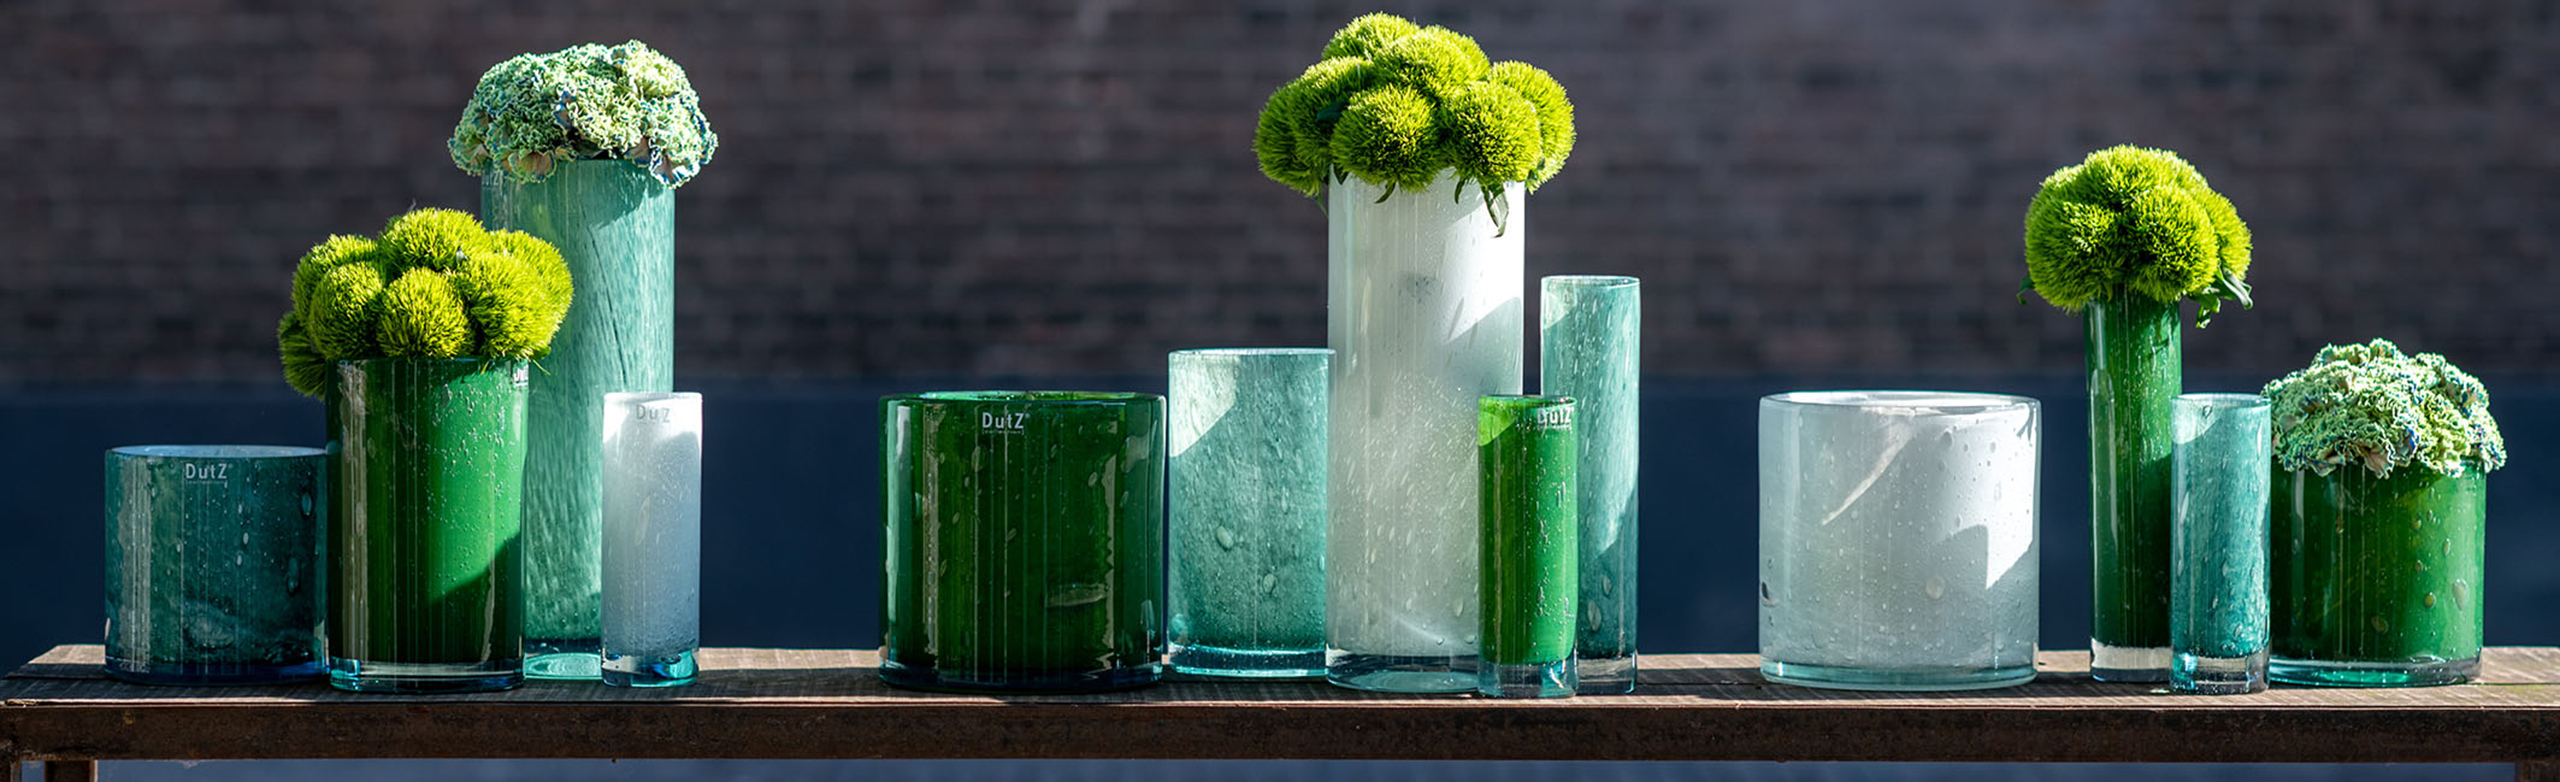 DutZ recycled glass cylinders in the colour green and wihite. On a small table are cylinders in different sizes. Some are filled with flowers